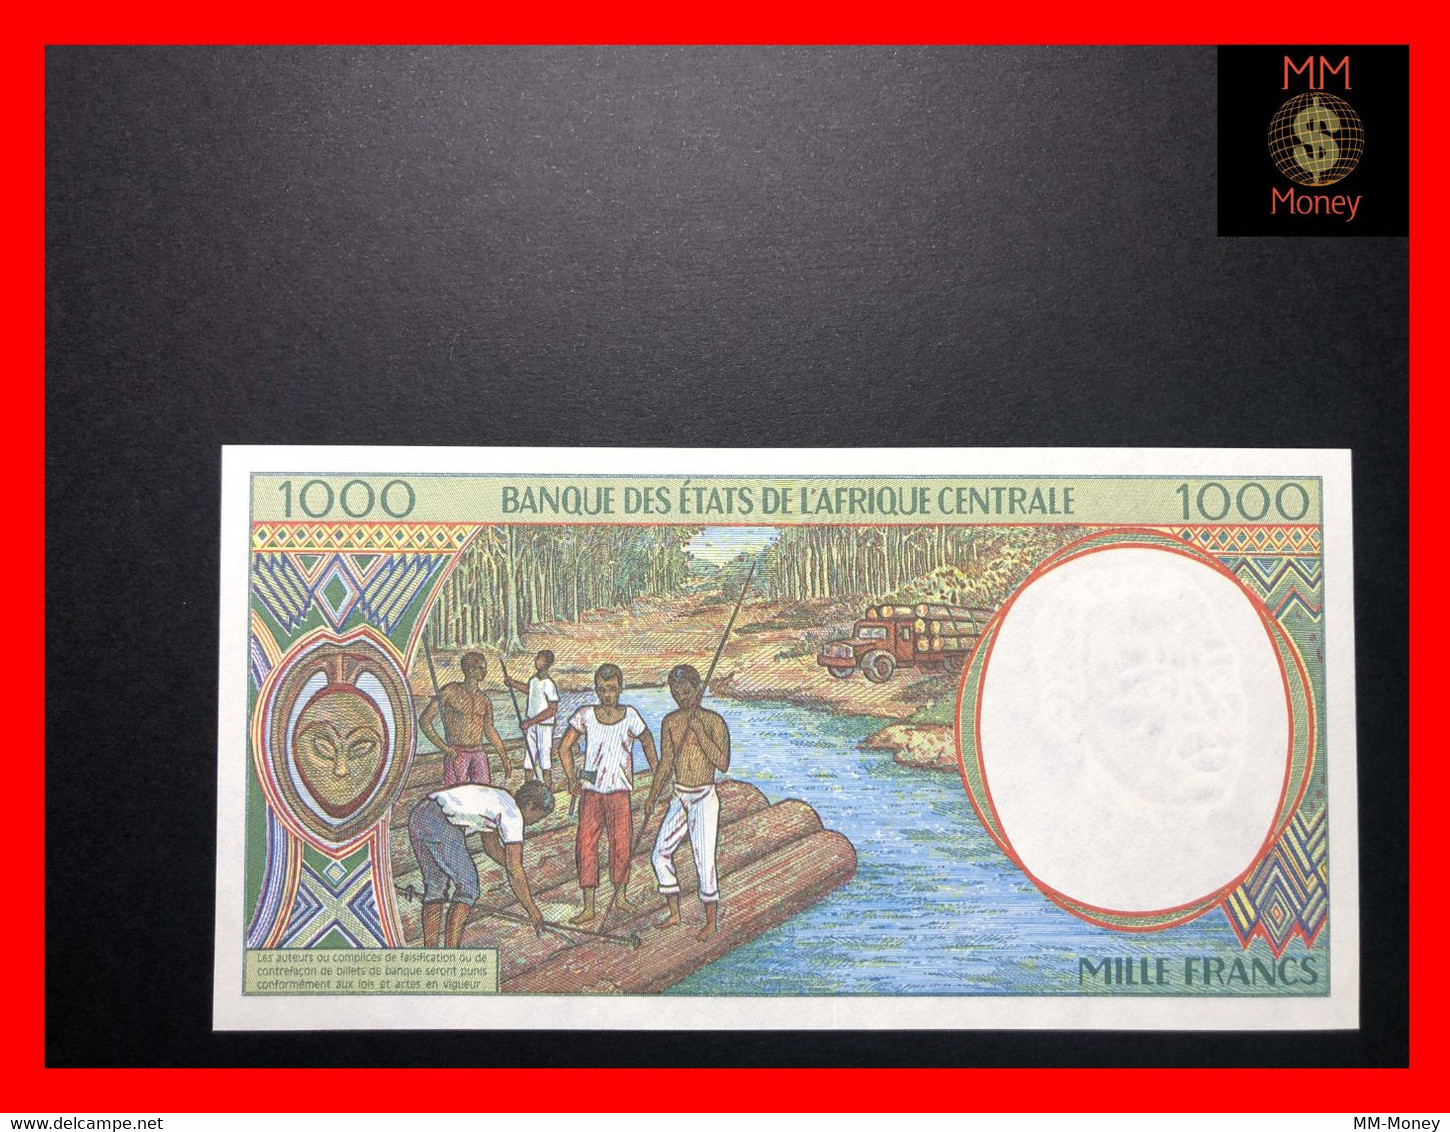 CENTRAL AFRICAN STATES  "F"  Central African Republic 1.000 1000 Francs 1994 P. 302 F  UNC - Zentralafrikanische Staaten